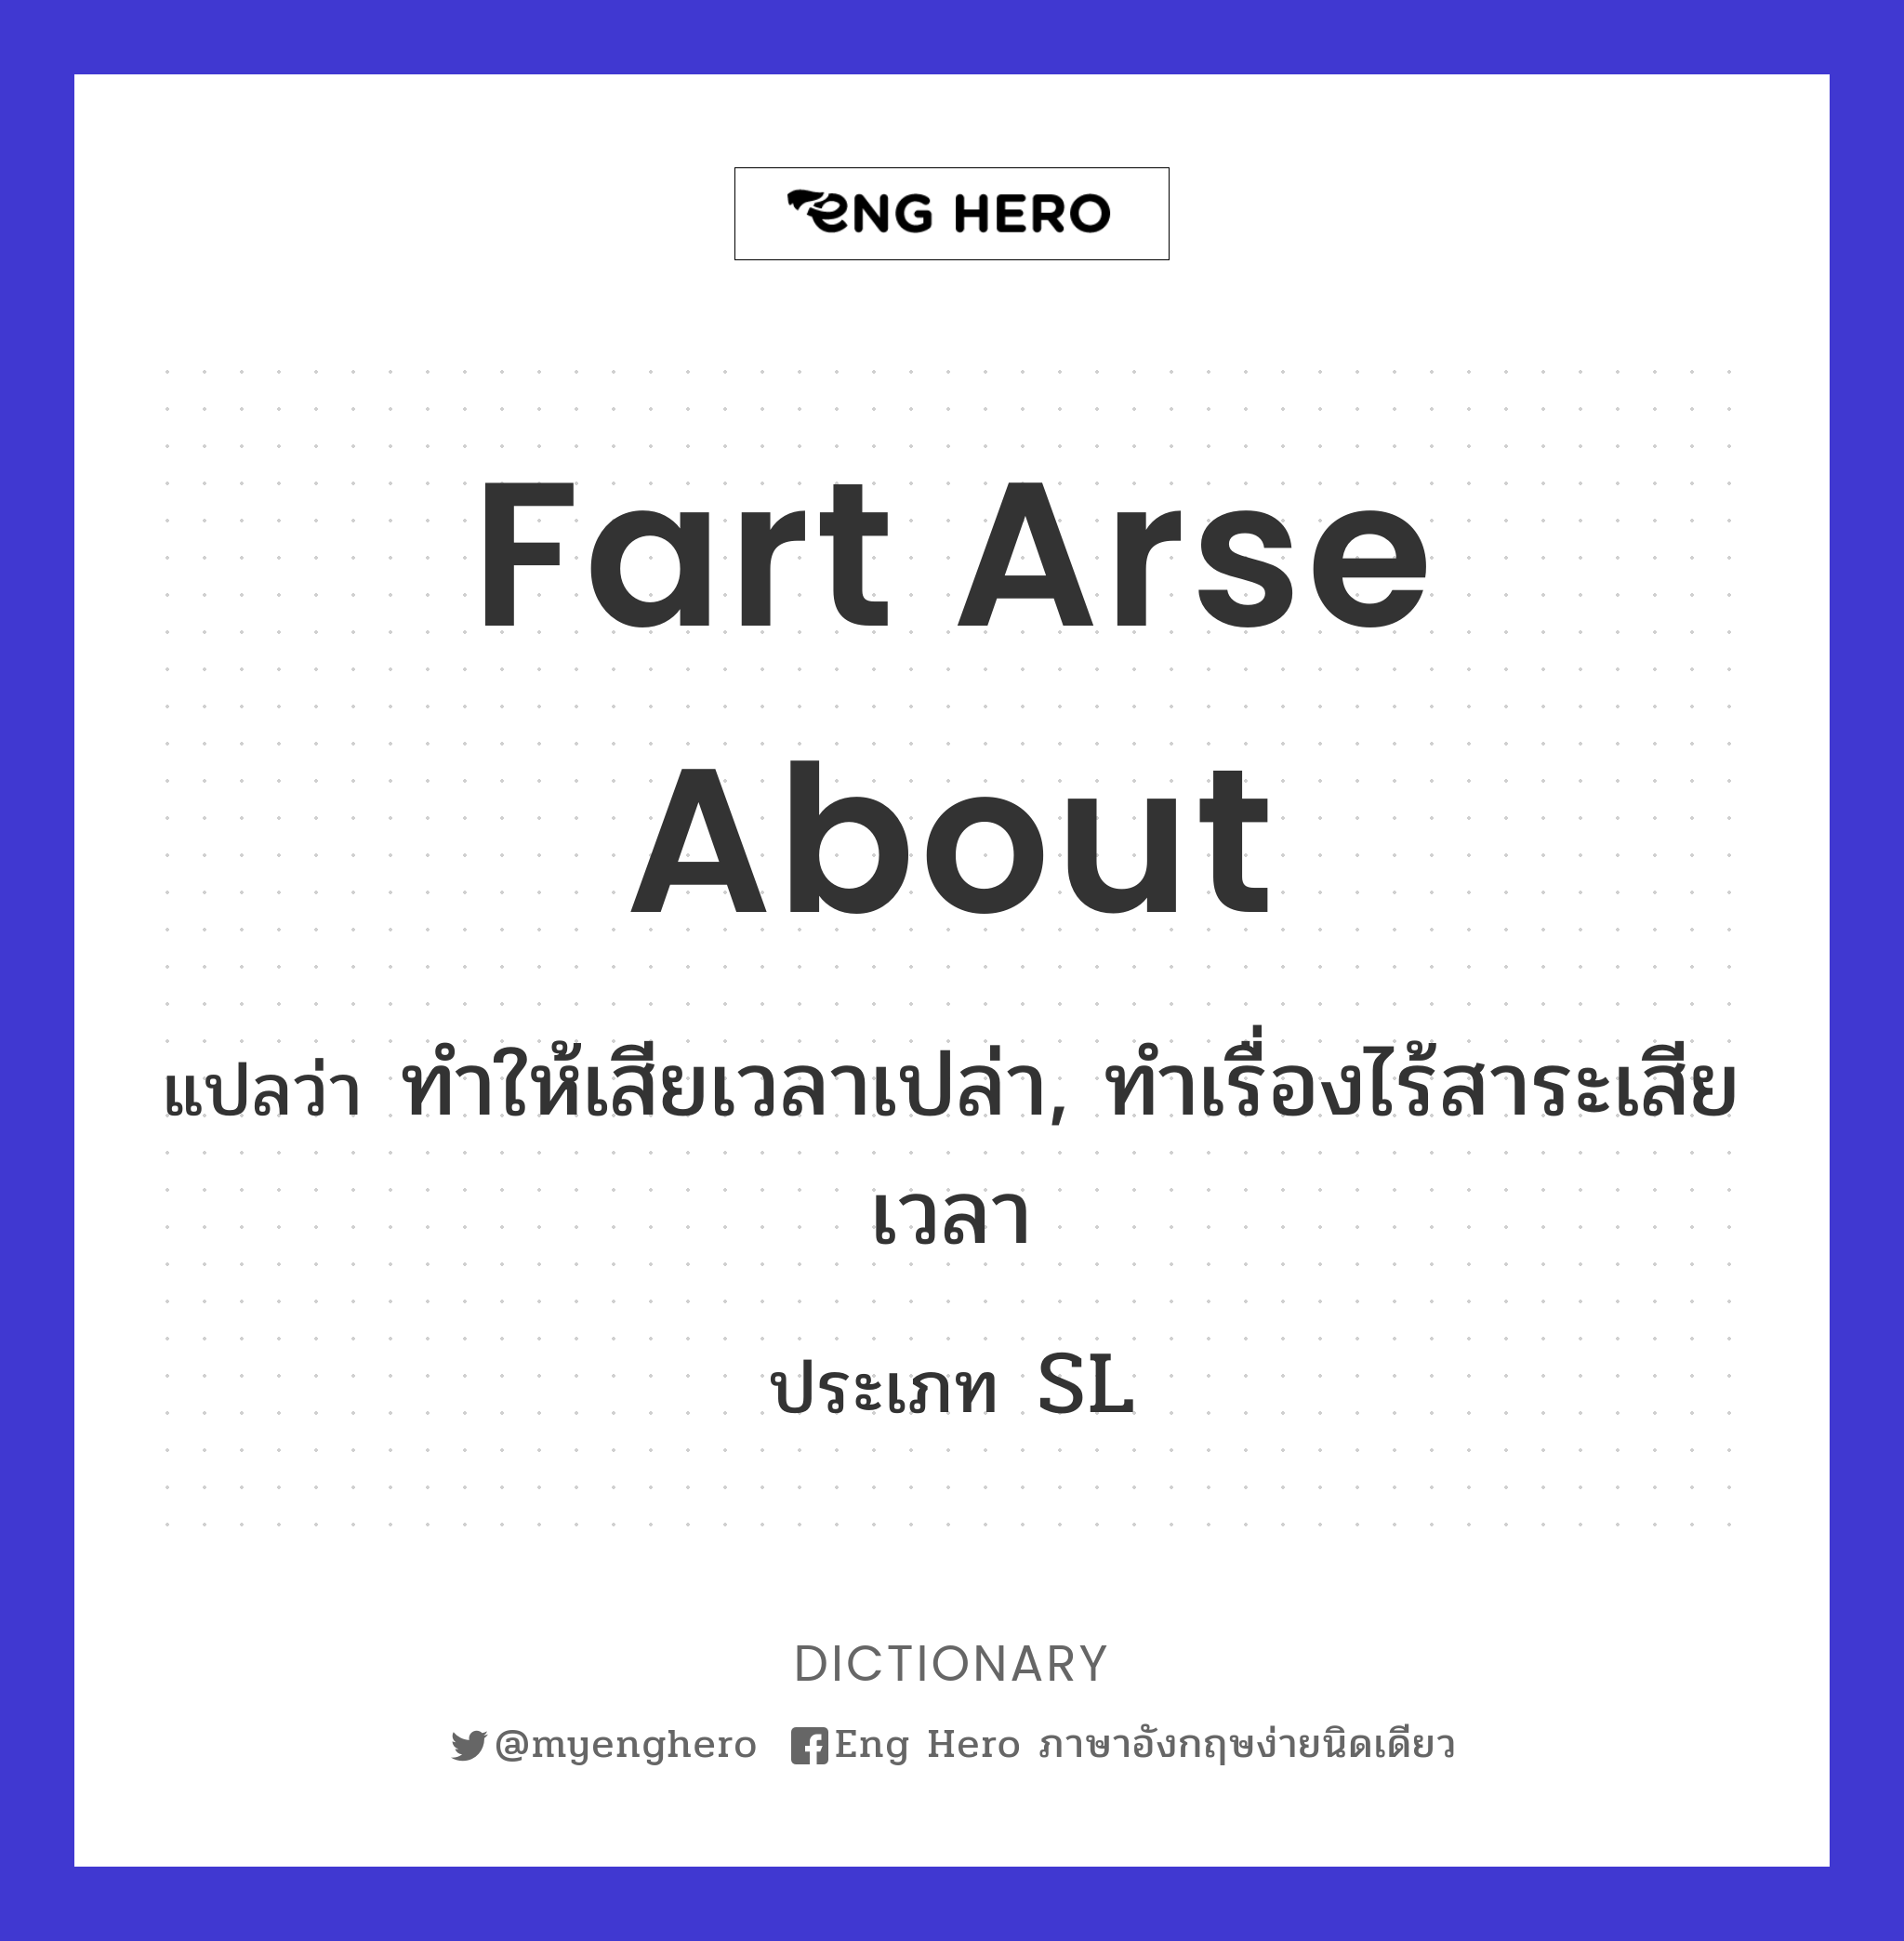 fart arse about